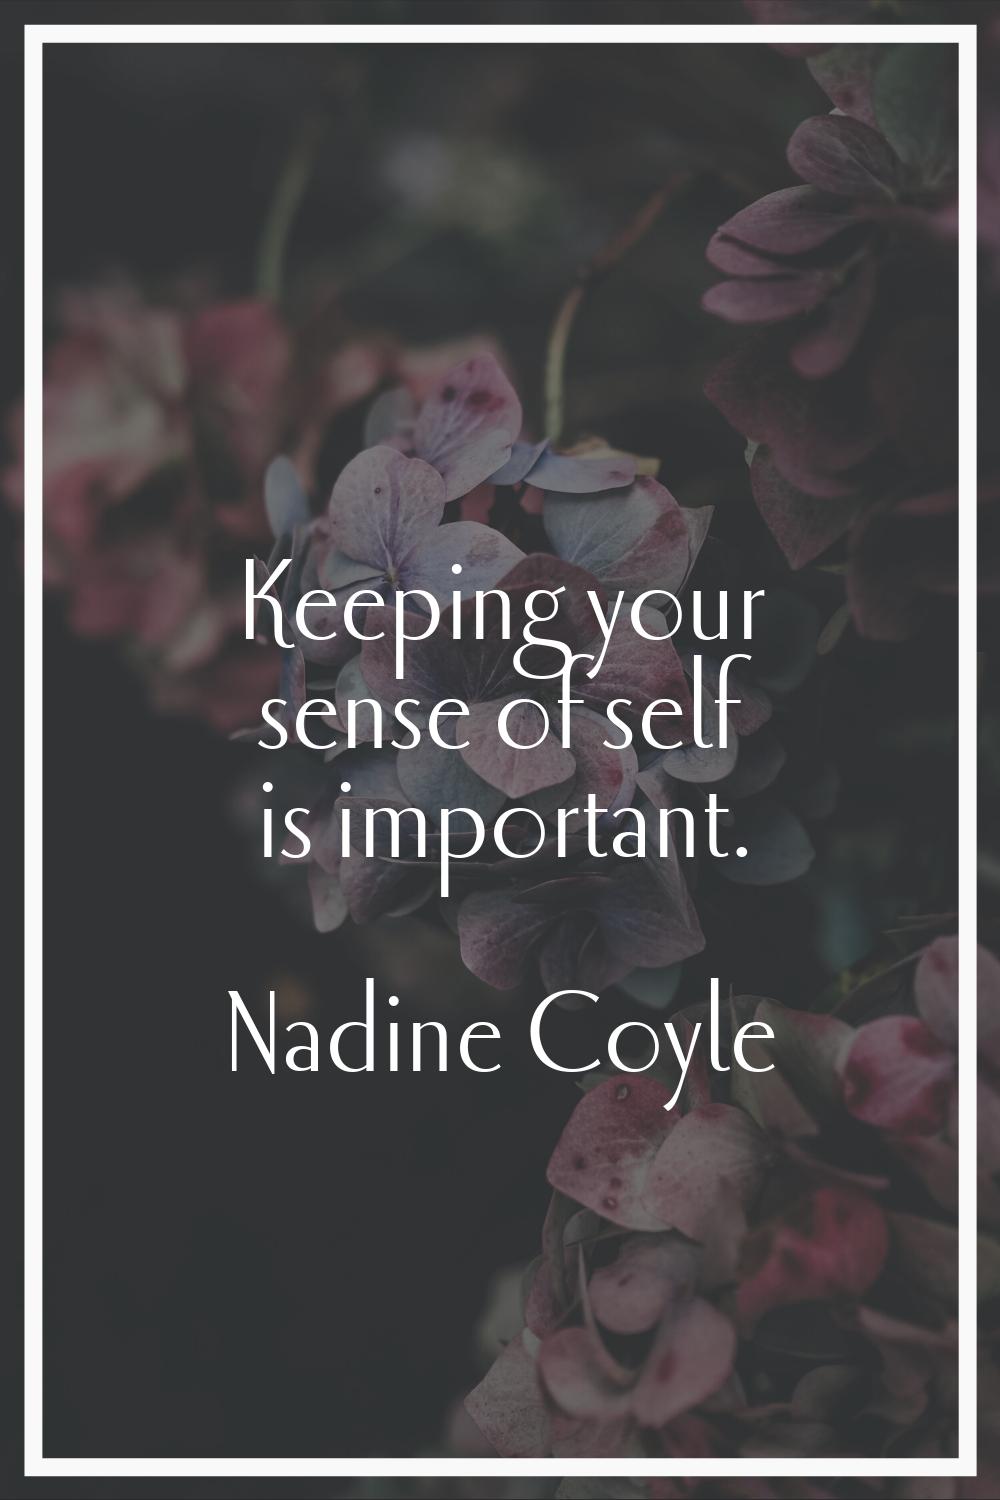 Keeping your sense of self is important.